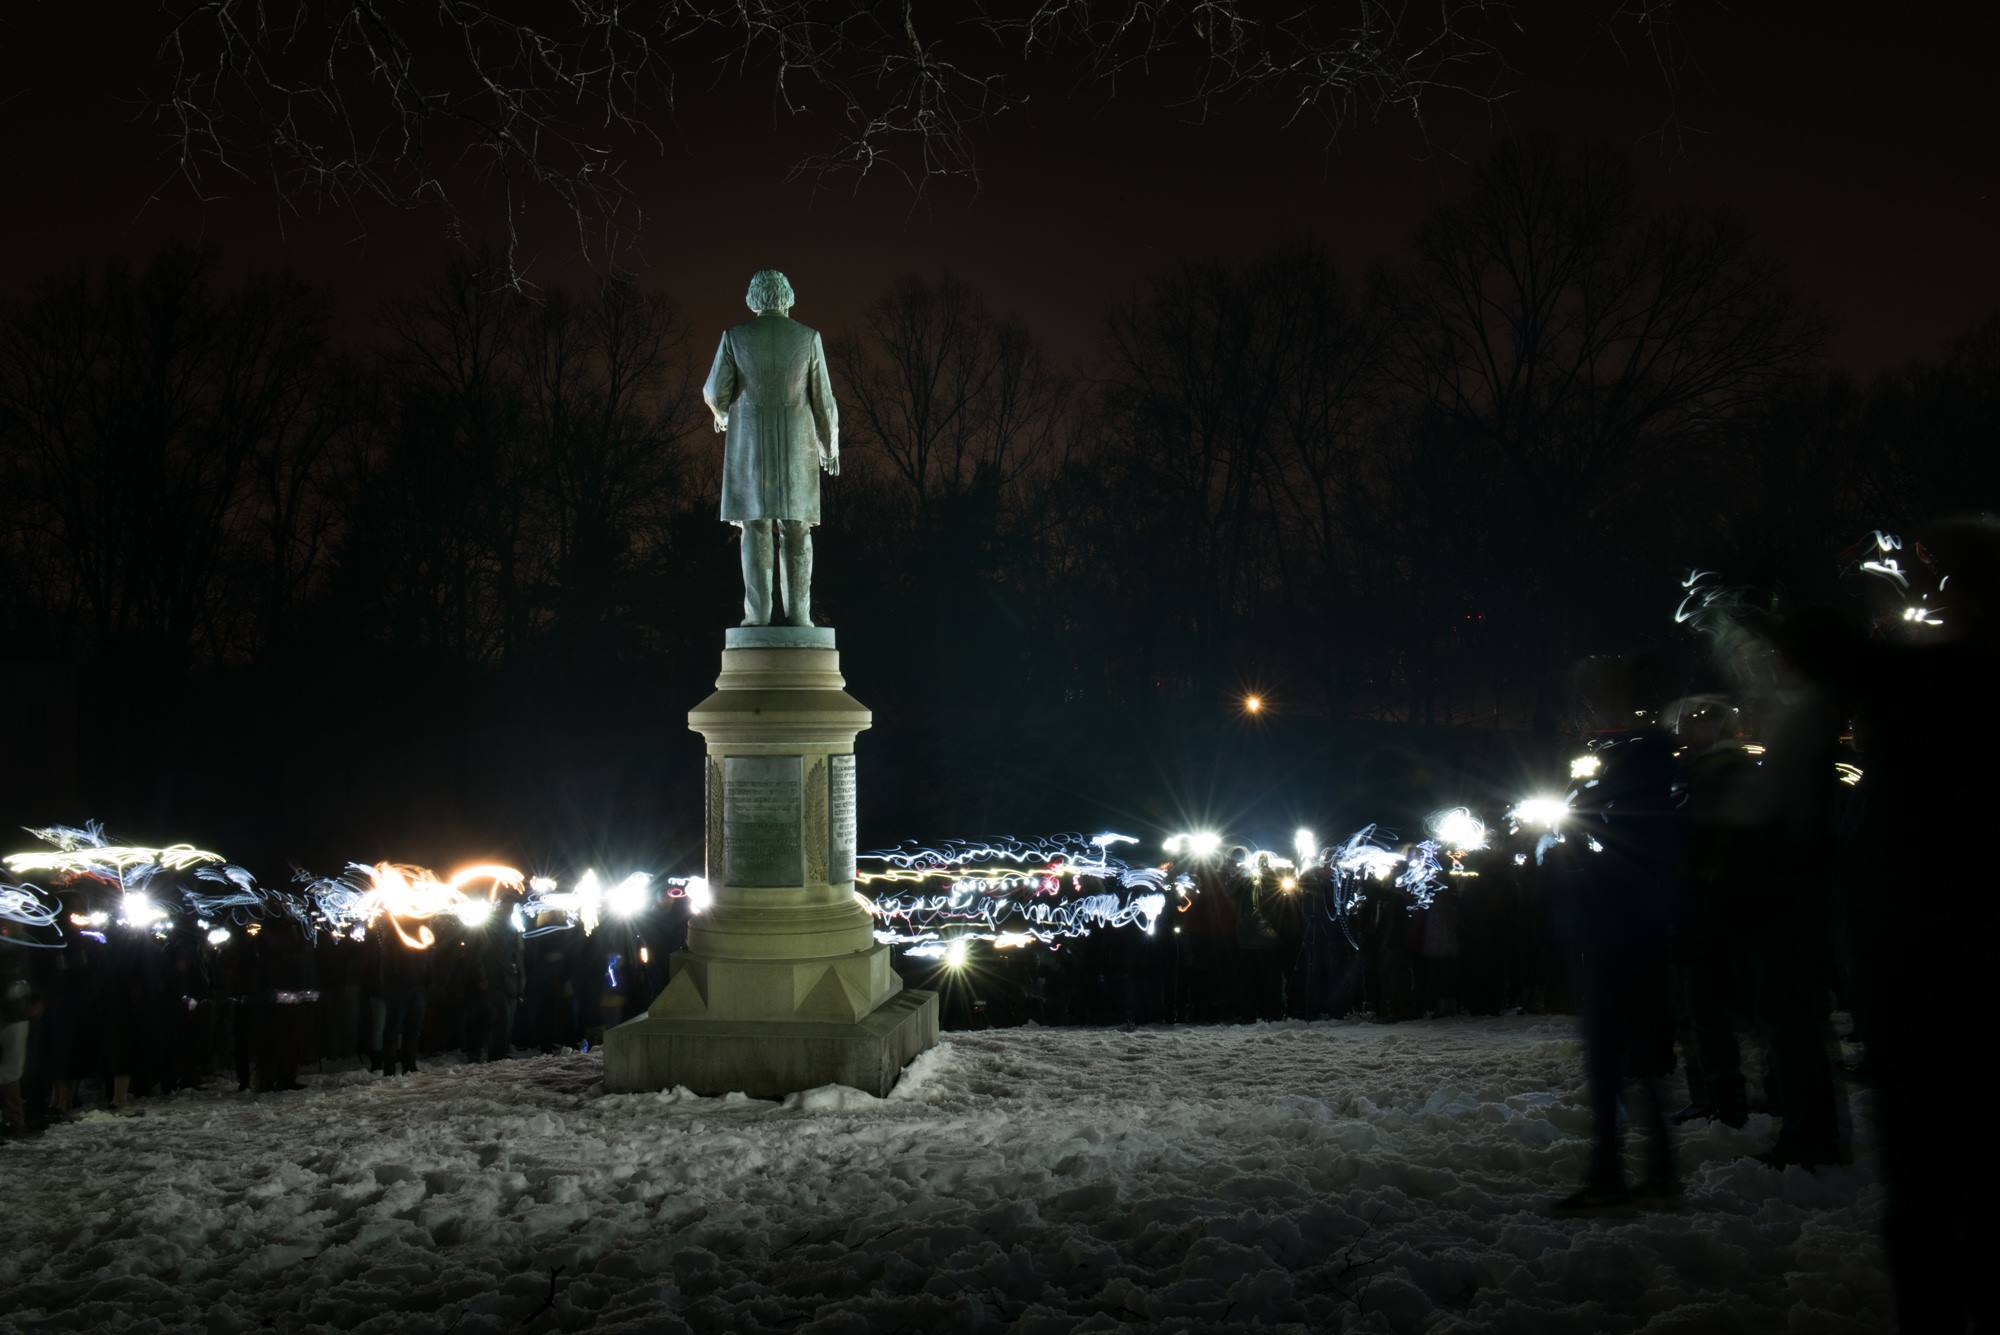 Using flashlights people "painted with light" to create a nighttime photo of Frederick Douglass statue.